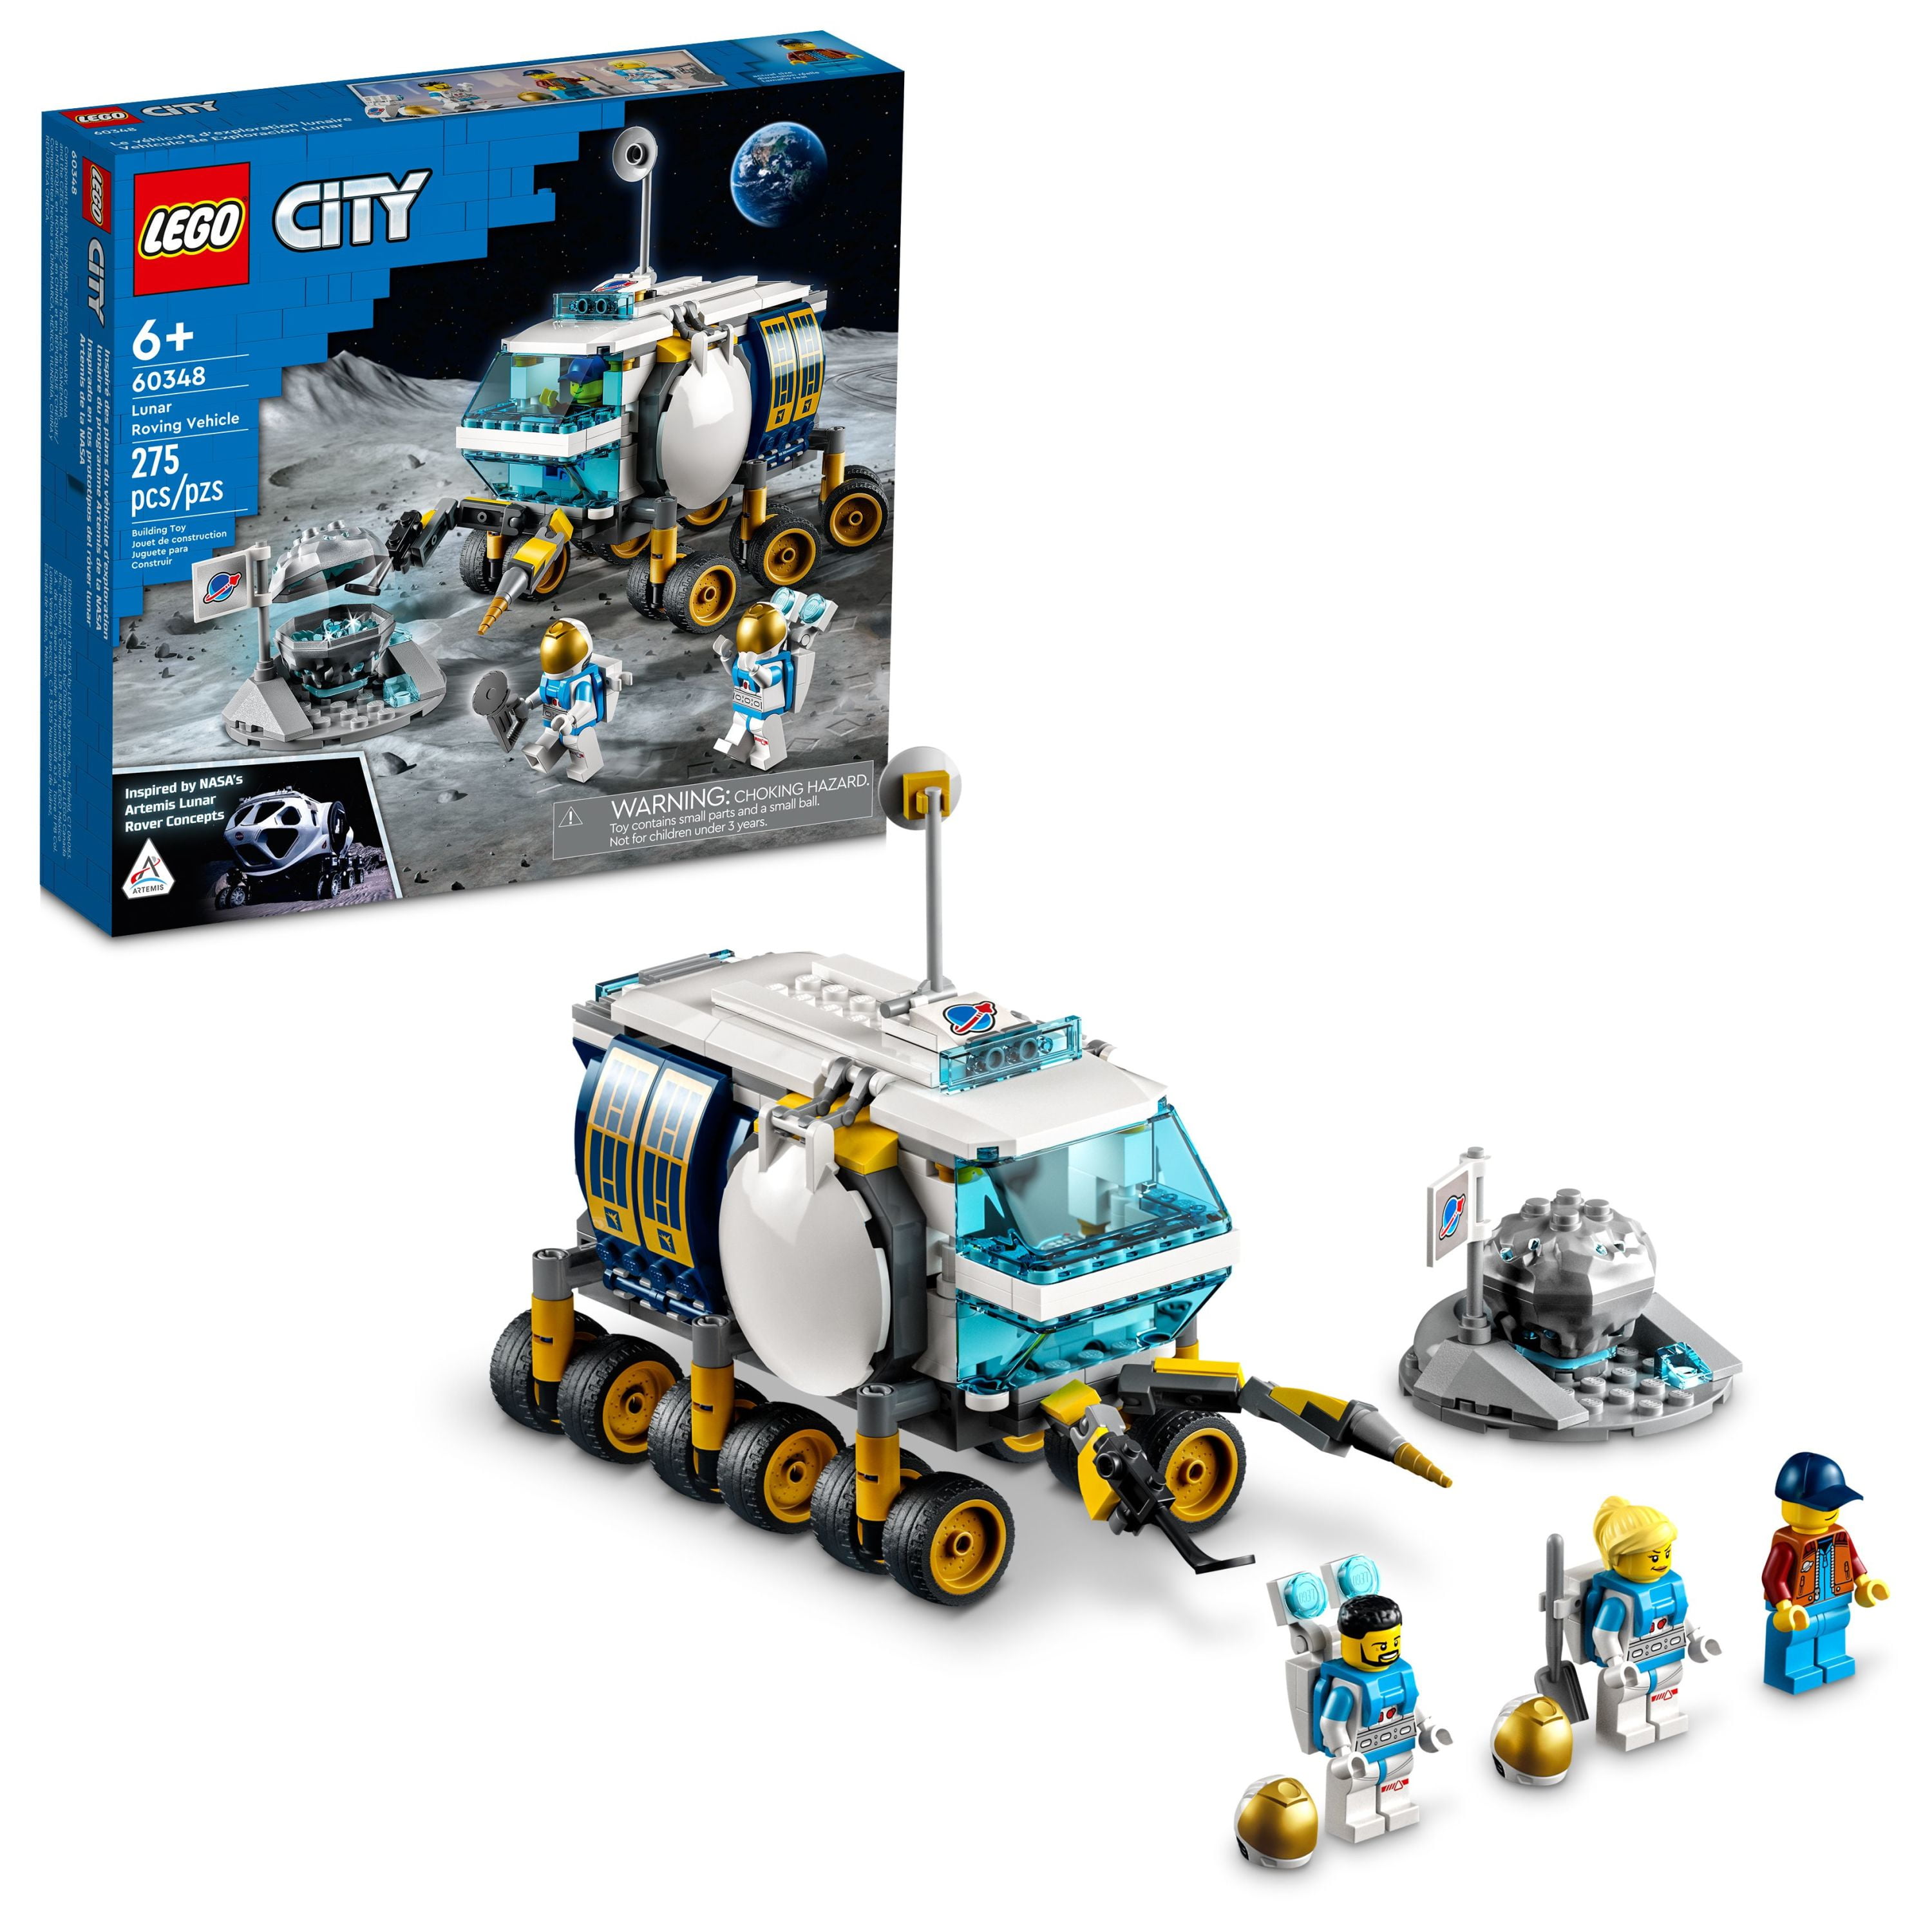 oase Vær sød at lade være chef LEGO City Lunar Roving Vehicle 60348 Outer Space Toy, NASA Inspired Set for  Kids 6 Plus Years Old with 3 Astronaut Minifigures - Walmart.com